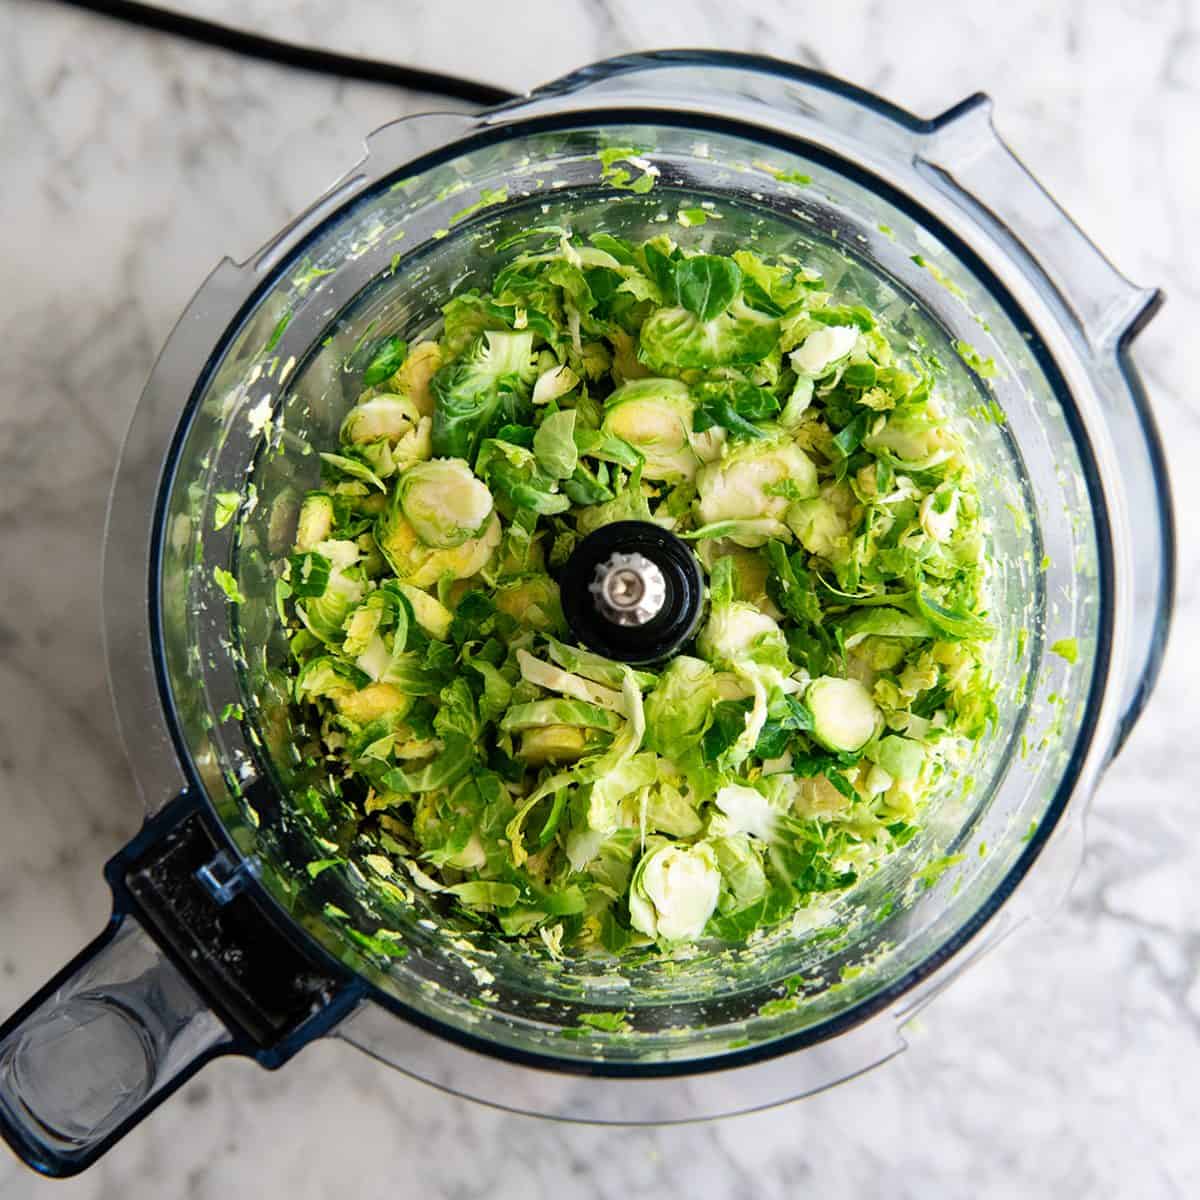 shredded brussels sprouts in a food processor to make Shredded Brussel Sprouts Salad